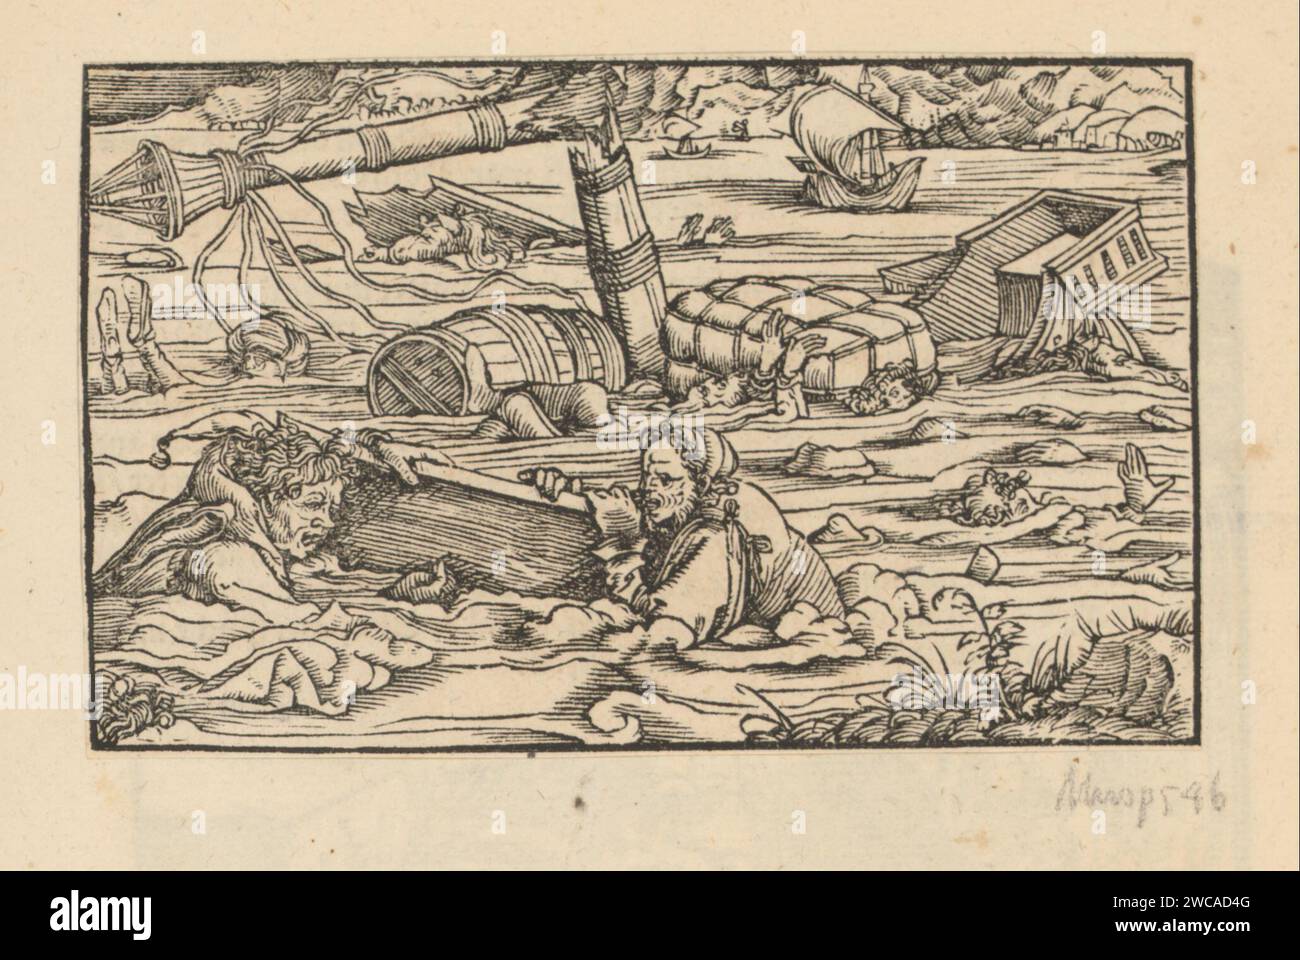 Drowning people of a shipwreck, Anonymous, Hans Weiditz (II), 1514 - 1531 print In the sea, men, a woman, a nar and a horse float. Print is part of an album.  paper letterpress printing shipwreck Stock Photo